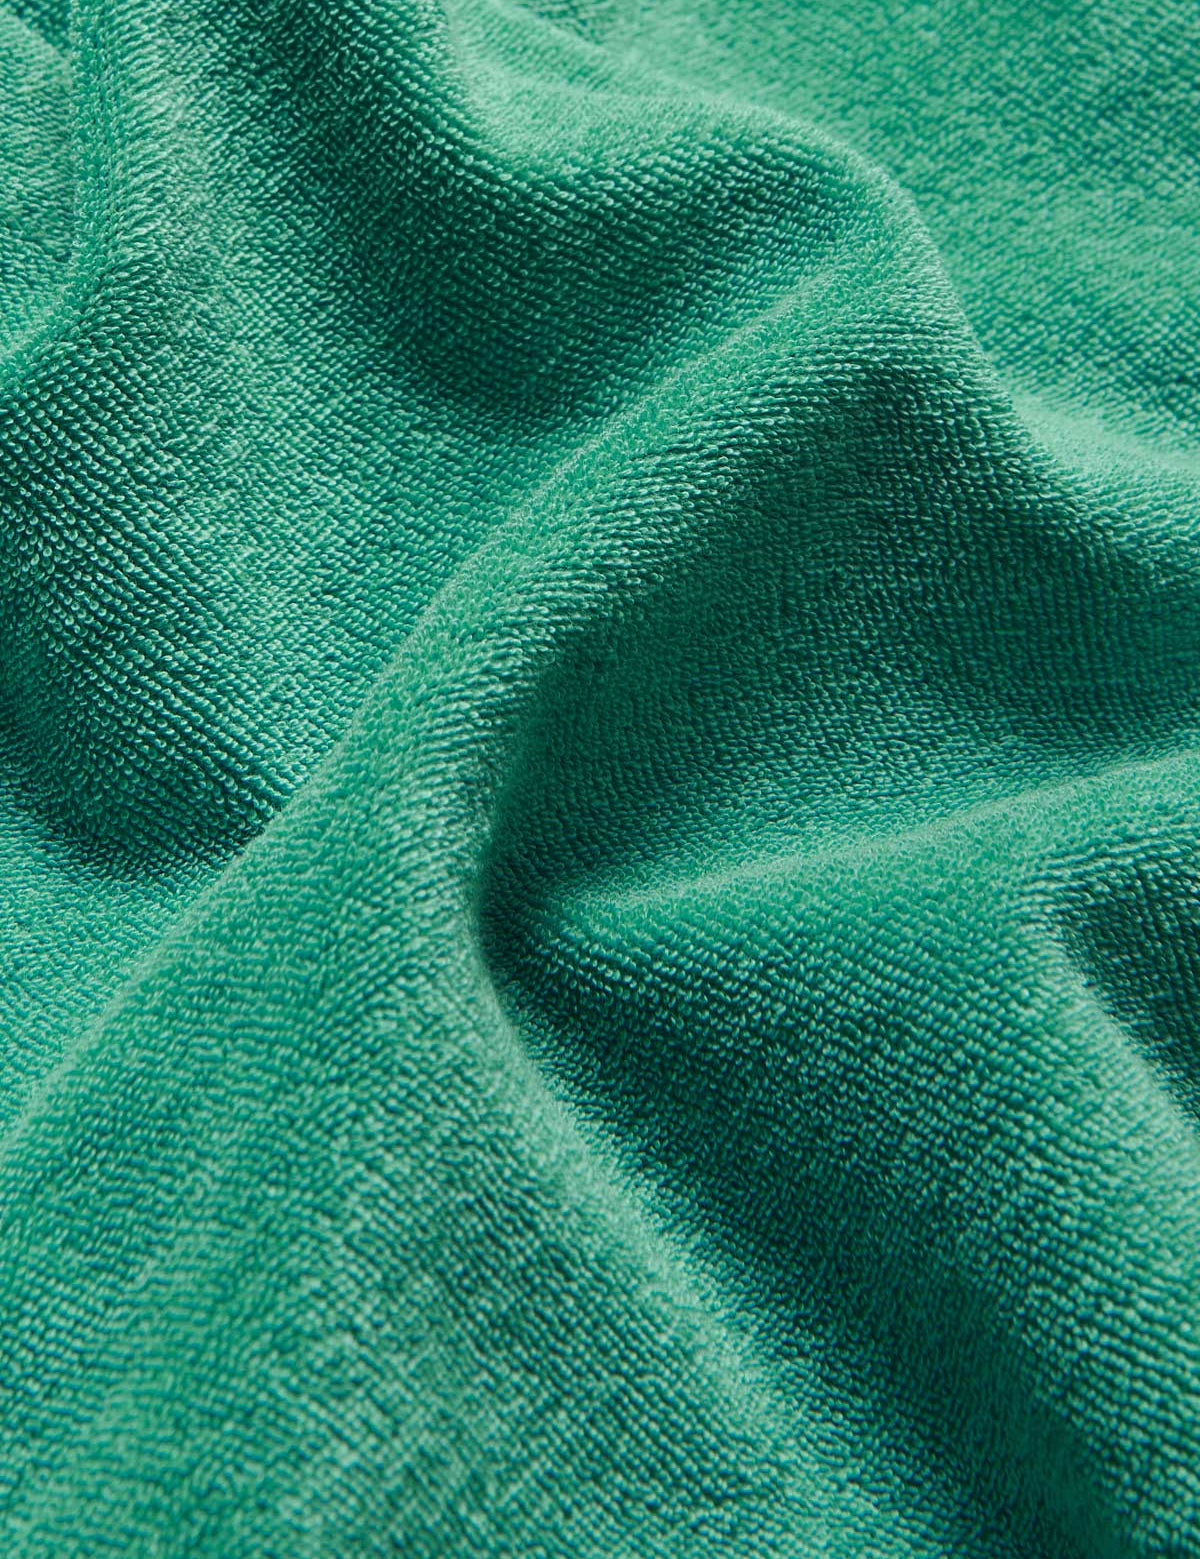 terry cloth detail image